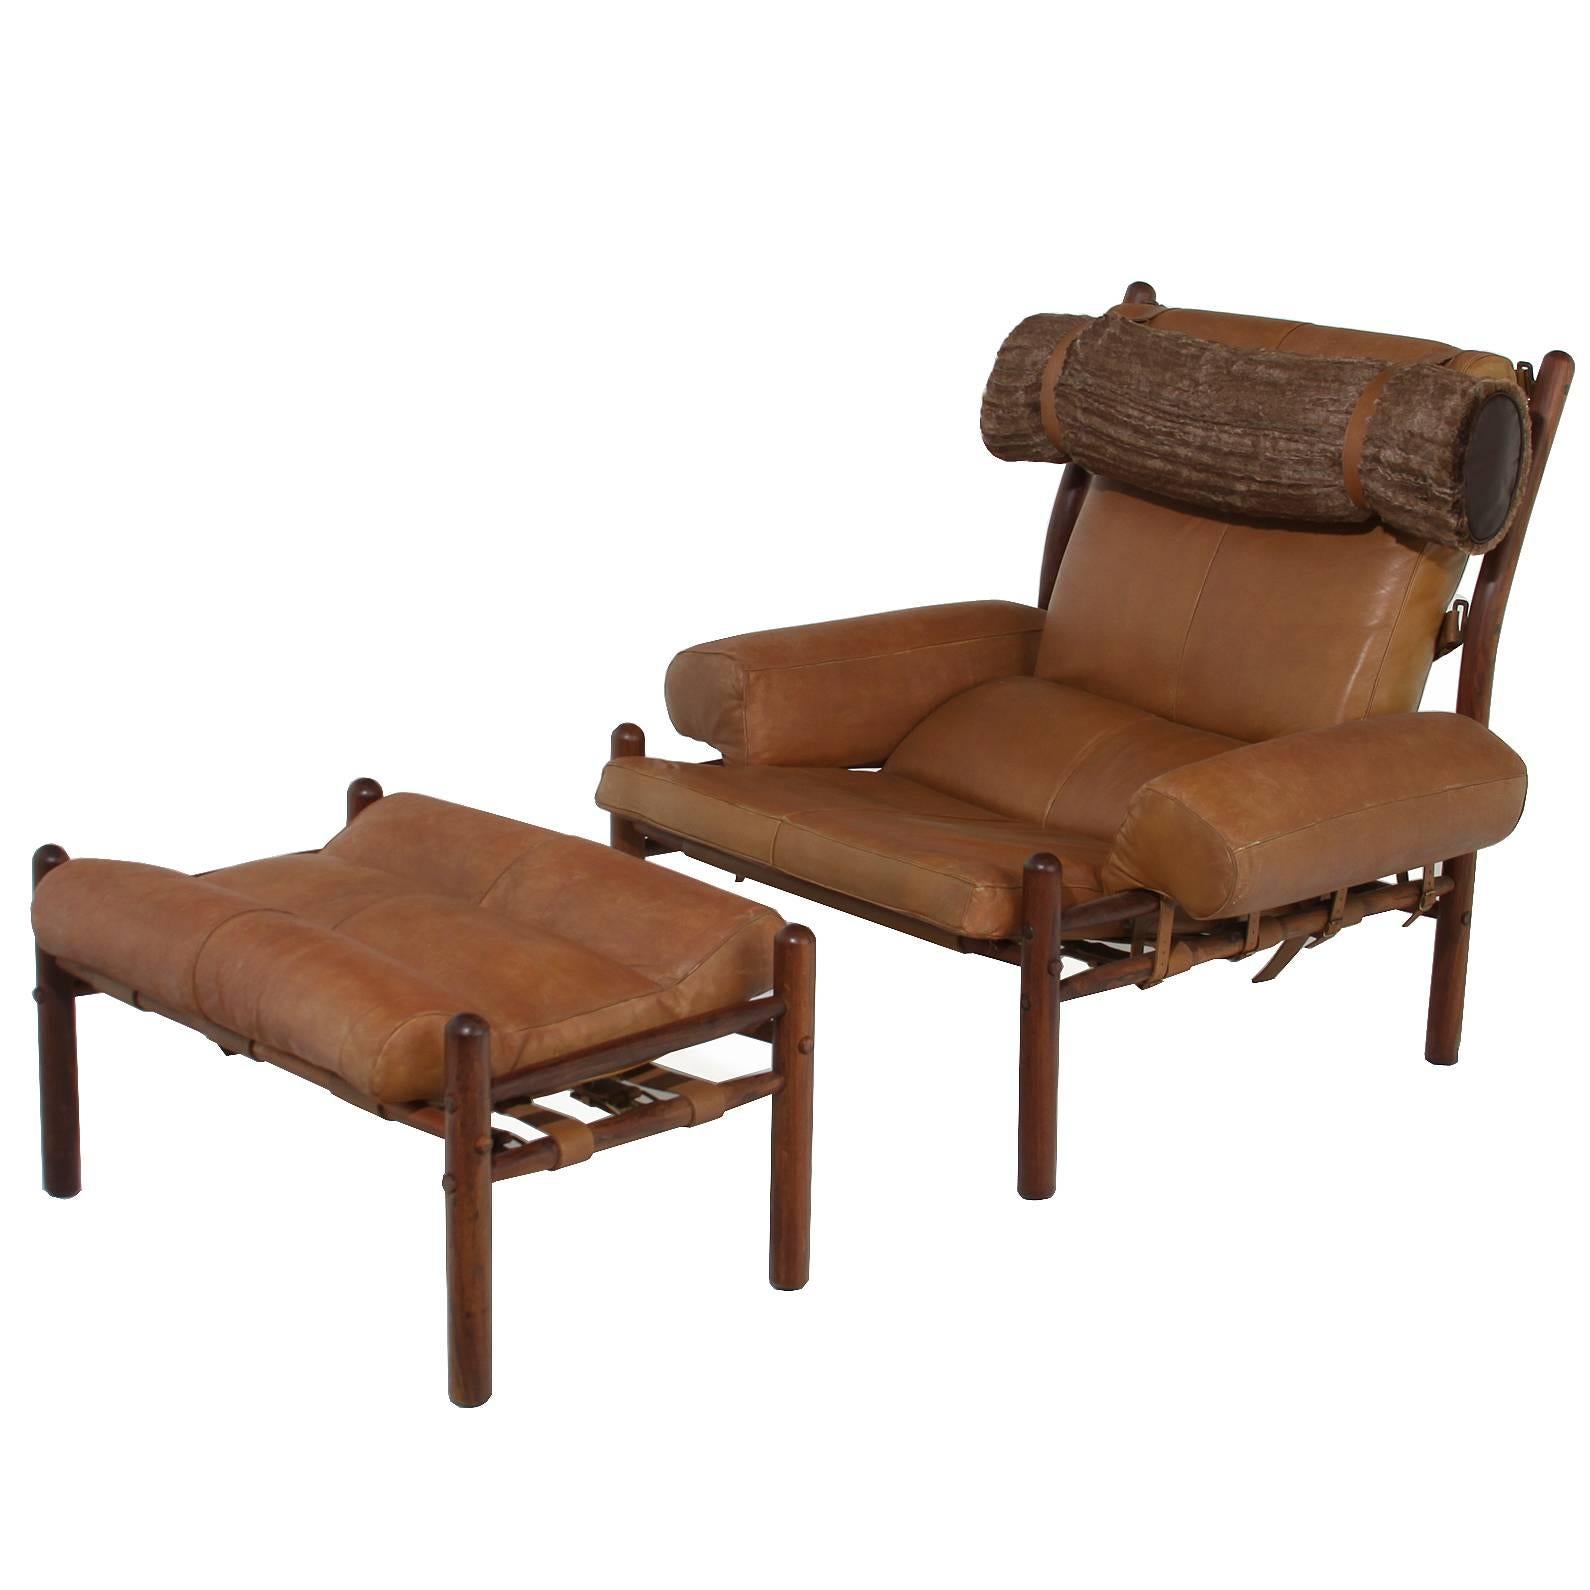 Armchair and Ottoman with Cognac Leather and Faux Fur Pillow by Arne Norell